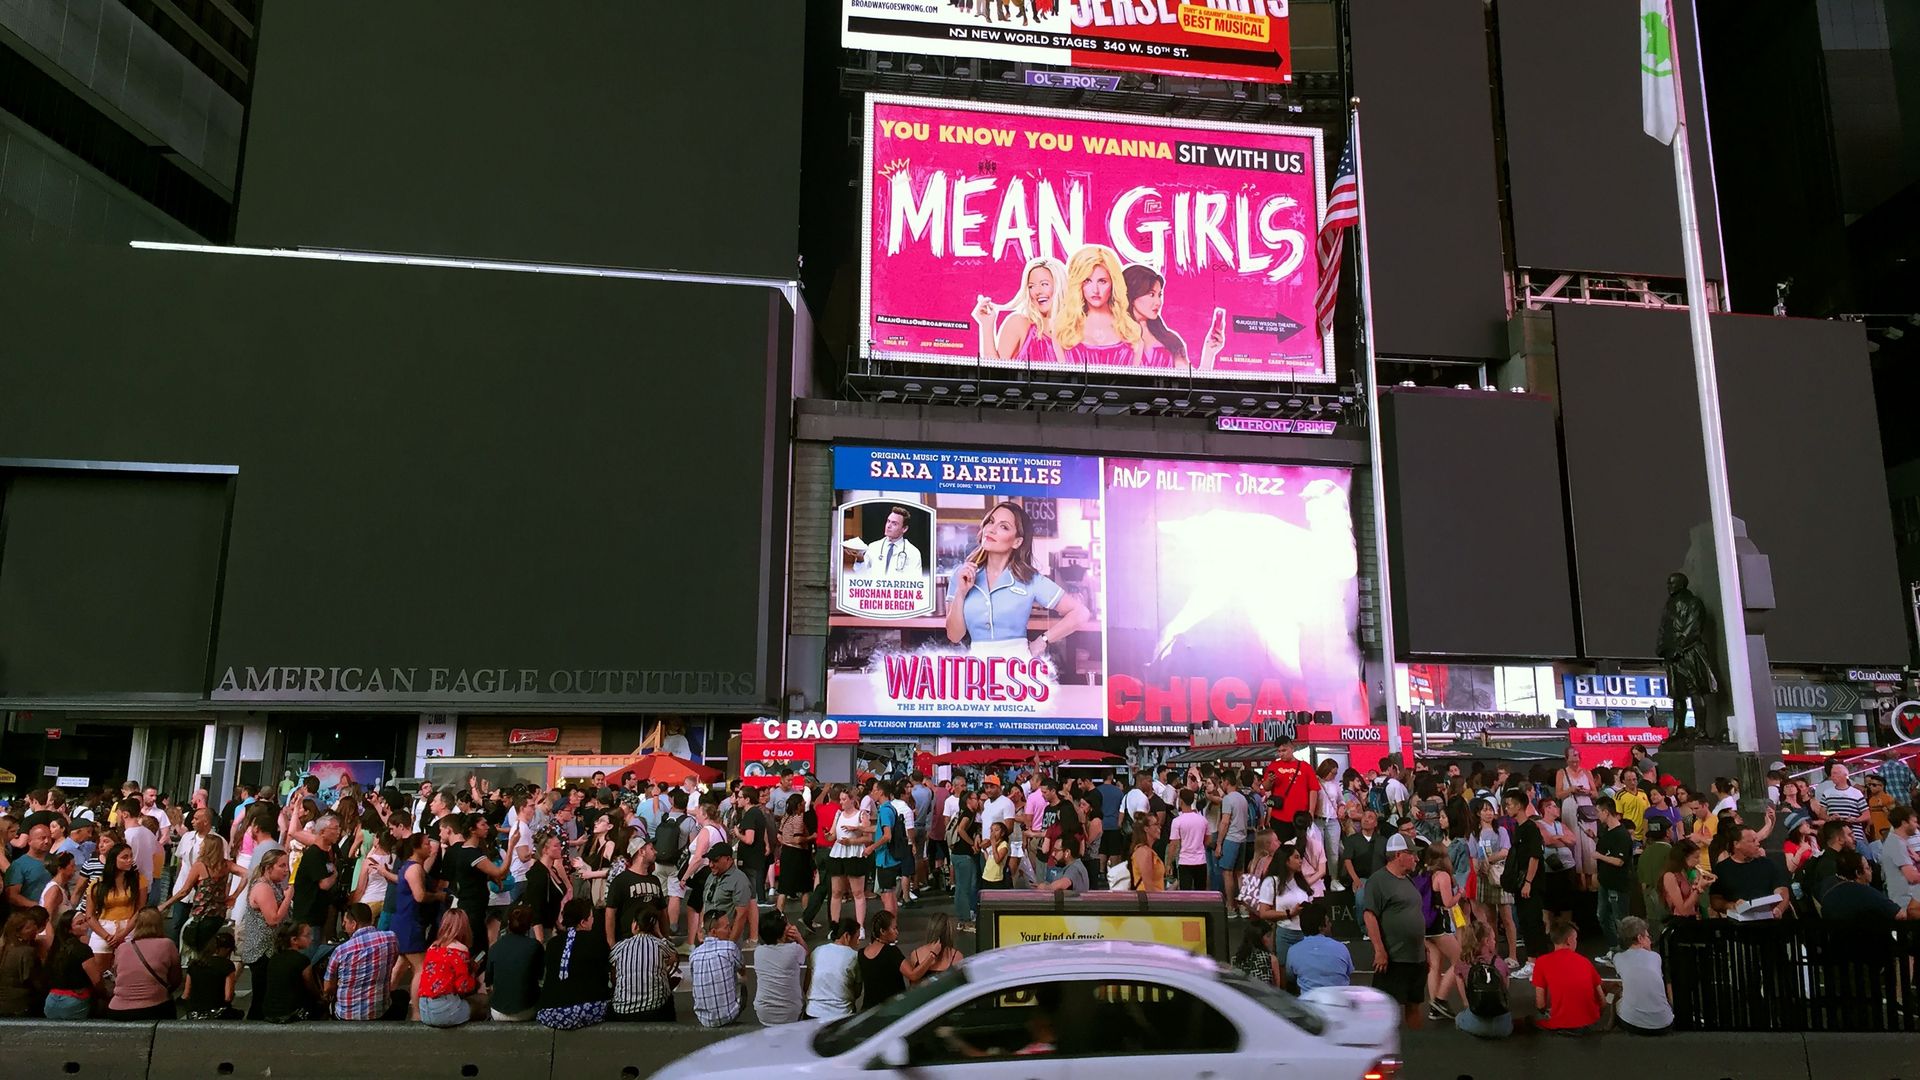 Times Square's billboards are seen black after a power outage hit Manhattan in New York City on July 13, 2019.